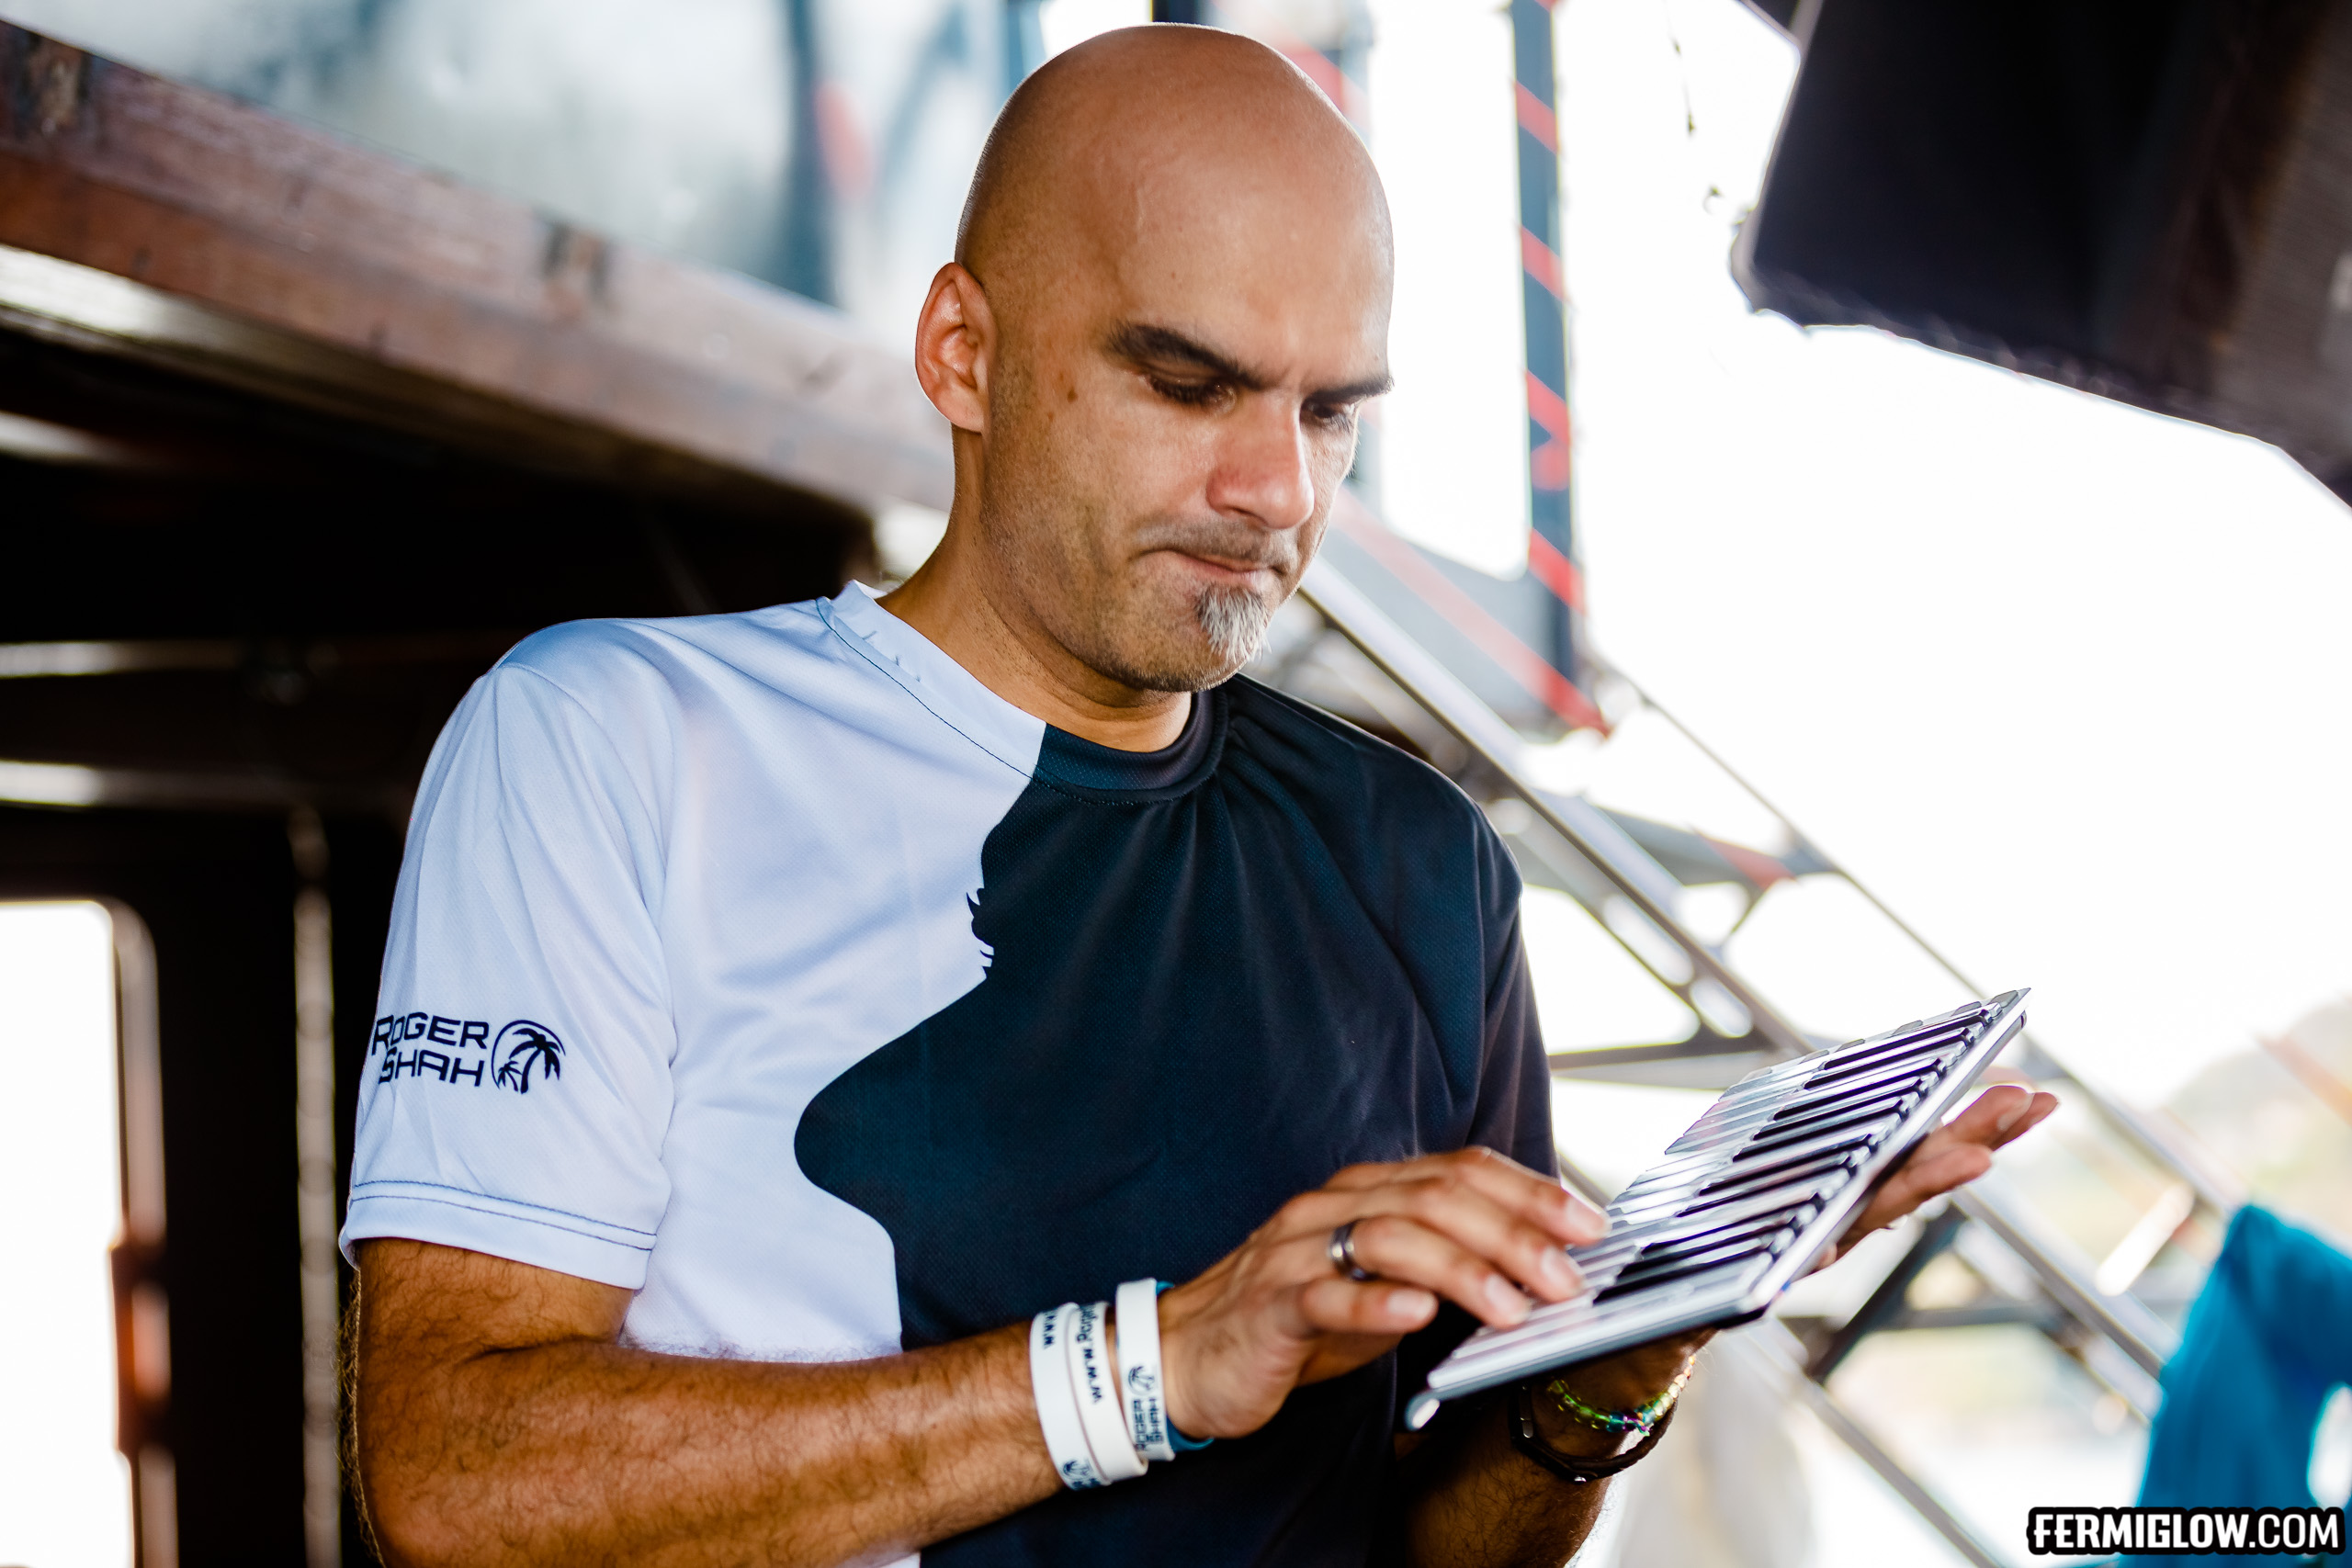 UnKonscious Festival and Magic Island presents Roger Shah Open To Close Experience Boat Party 2020